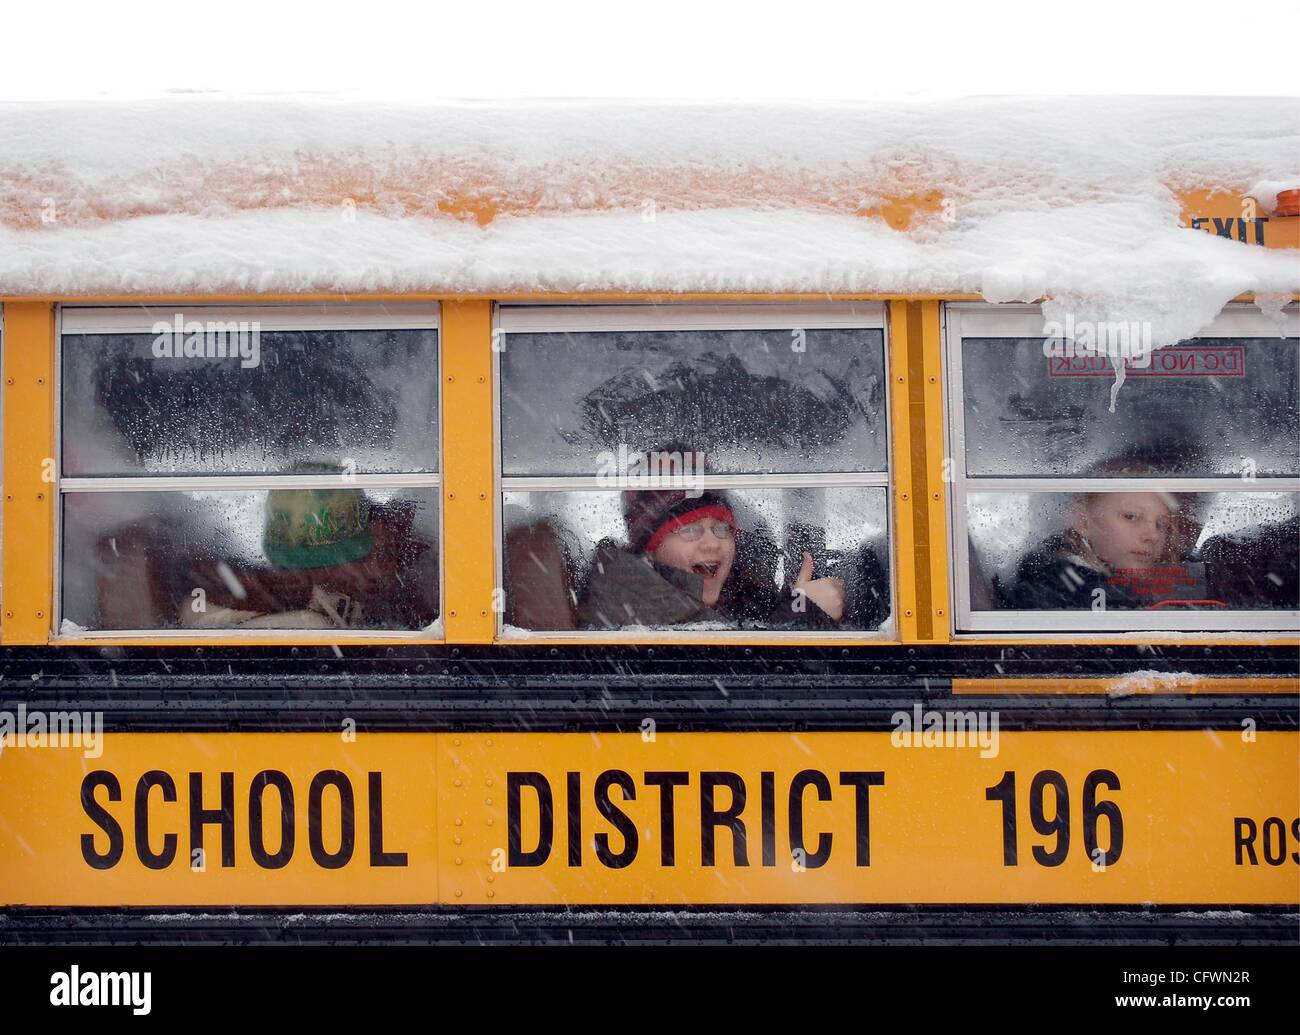 GLEN STUBBE •  gstubbe@startribune.com.Thursday, March 1, 2007 -- Apple Valley, Minn. -- Students from Scott Highlands Middle School in Apple Valley  show their enjoyment as schools  released students one hour early Thursday due to weather and driving conditions.  The Rosemount, Eagan, Apple Valley  Stock Photo